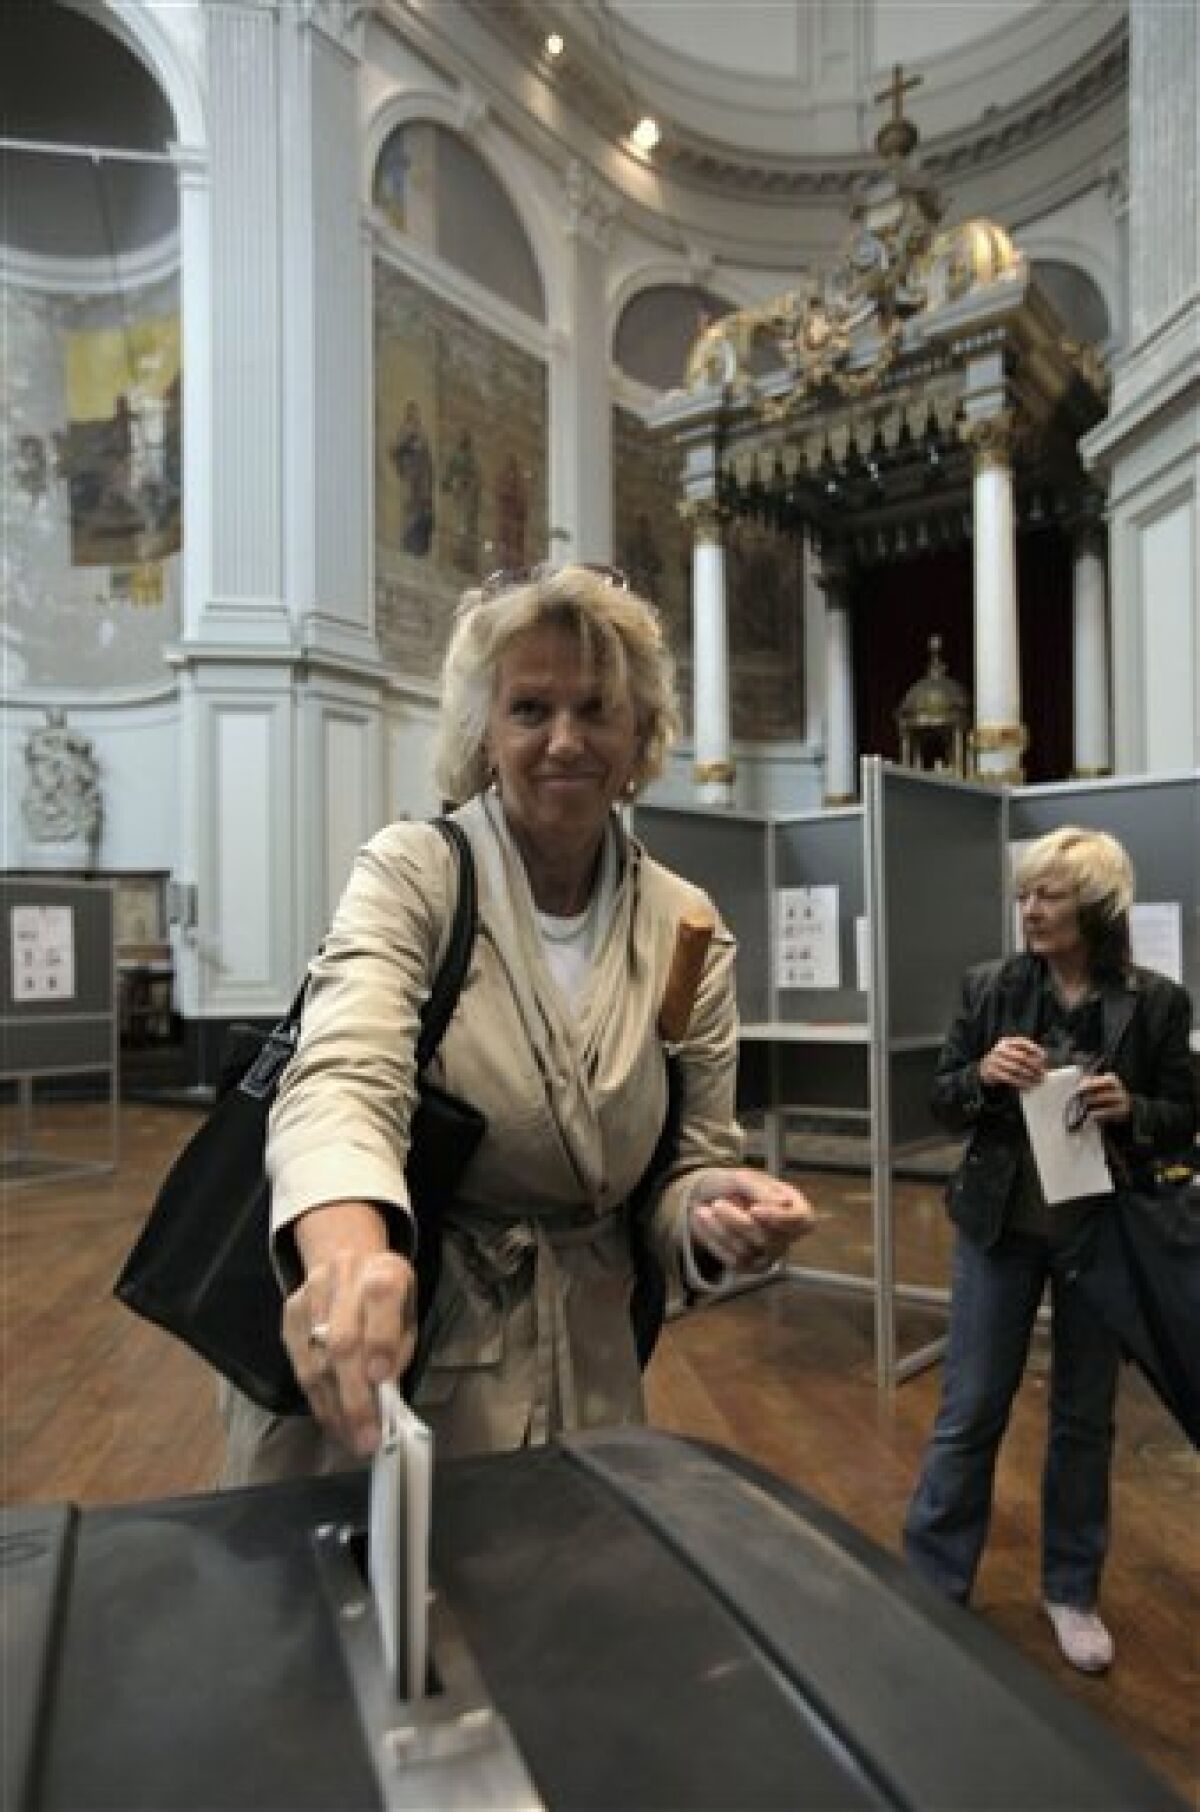 A woman casts her ballot at a polling station in a church in Amsterdam, Netherlands, Wednesday, June 9, 2010. Voters go to the polls in election offering a choice between a Labor Party preaching traditional Dutch tolerance and a slew of right-leaning parties advocating a crackdown on immigration. The free-market VVD party leads polls thanks to its strong economic credentials. (AP Photo/Peter Dejong)